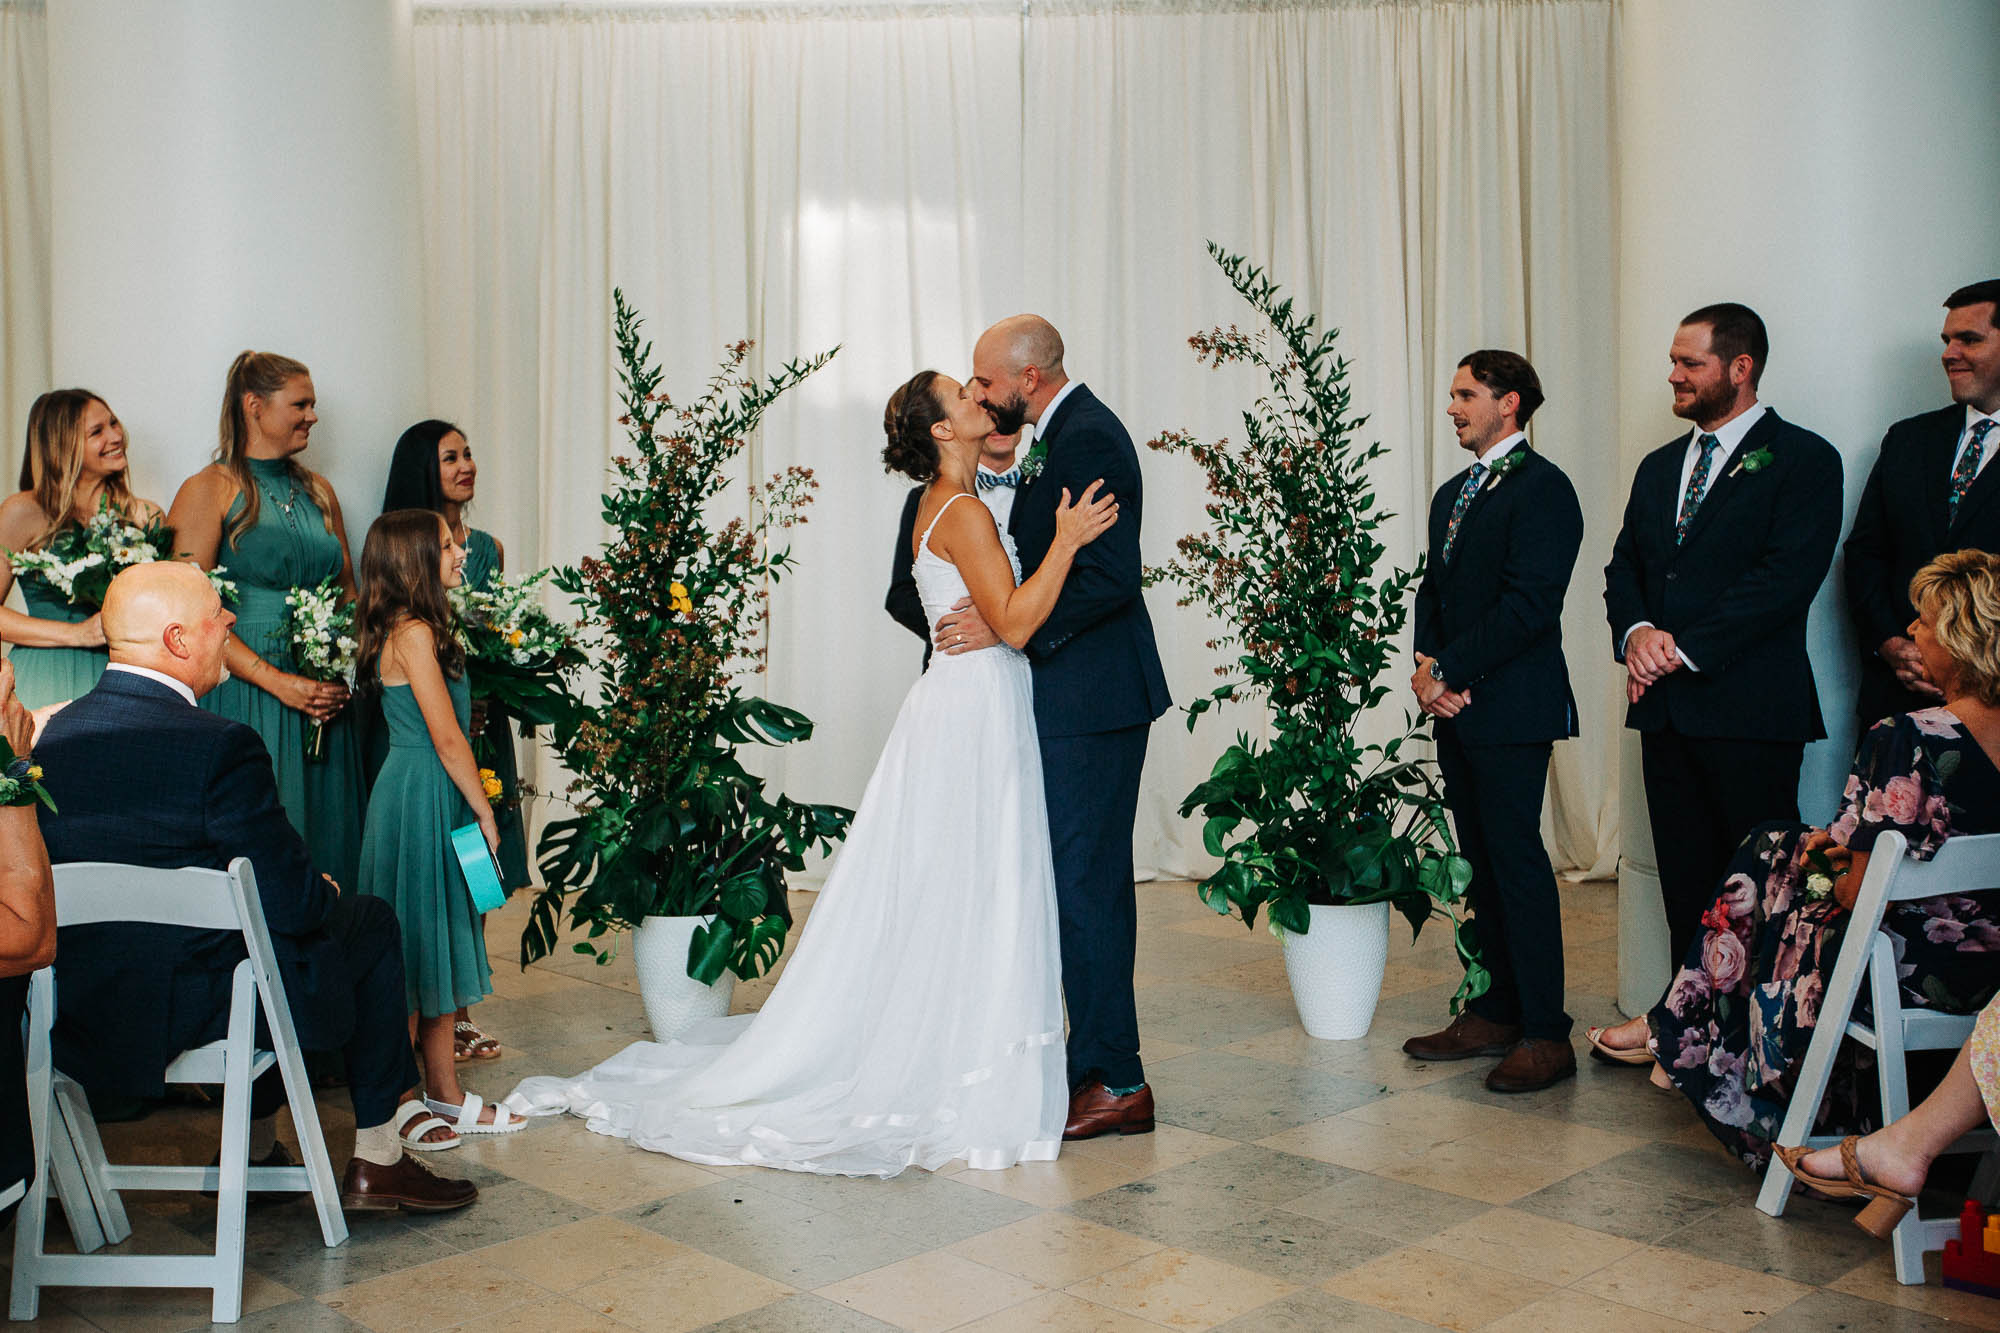 A bride and groom share their first kiss at their wedding ceremony